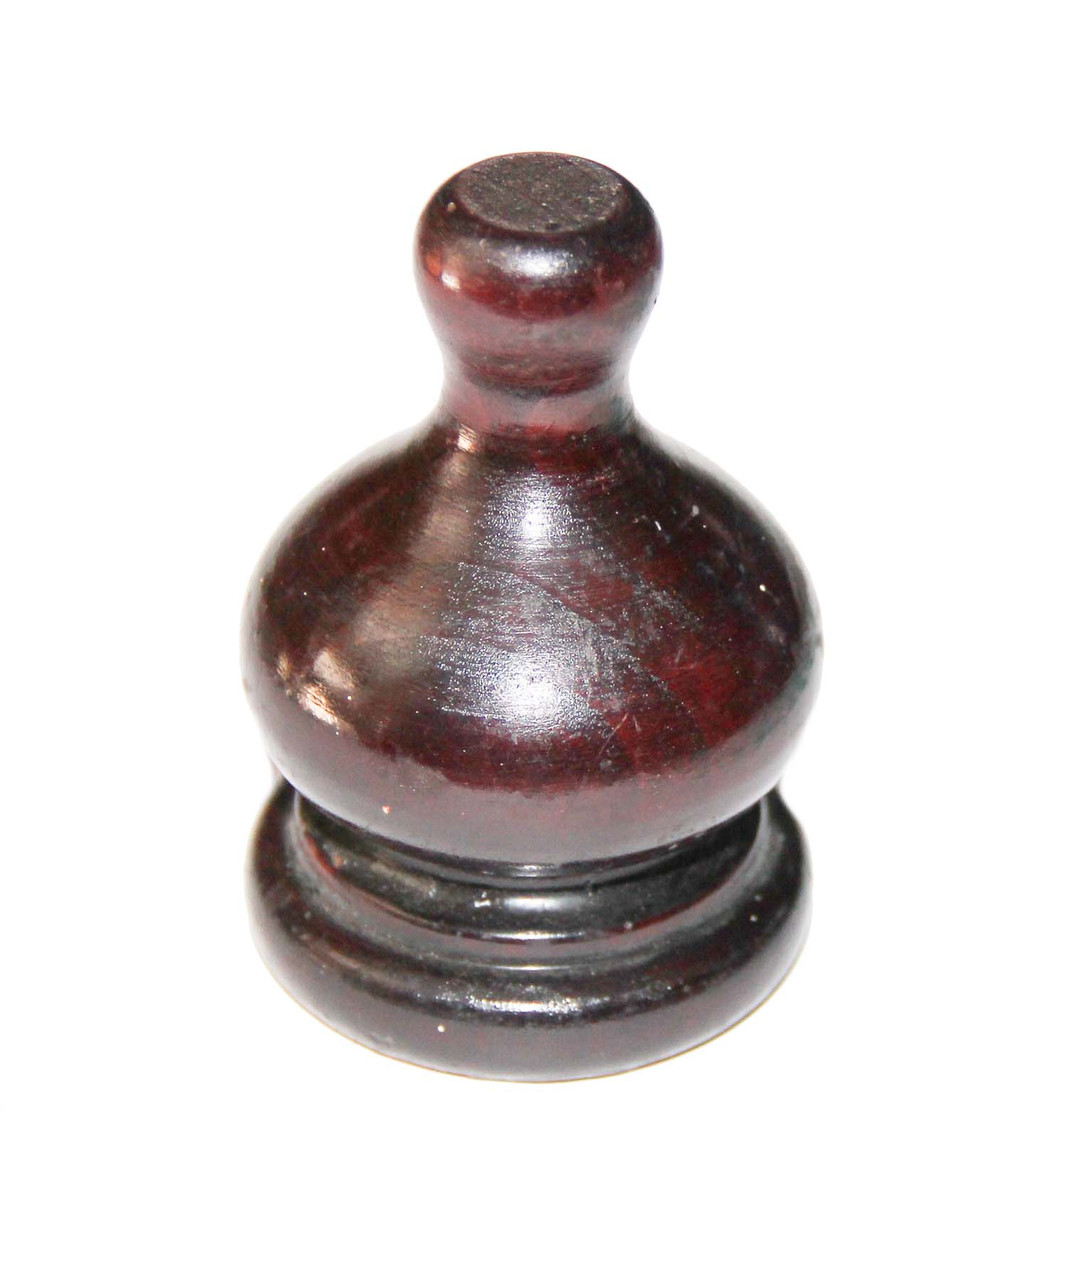 FINIAL WOOD FINISHED GLOSS CHERRY 3"L VINTAGE